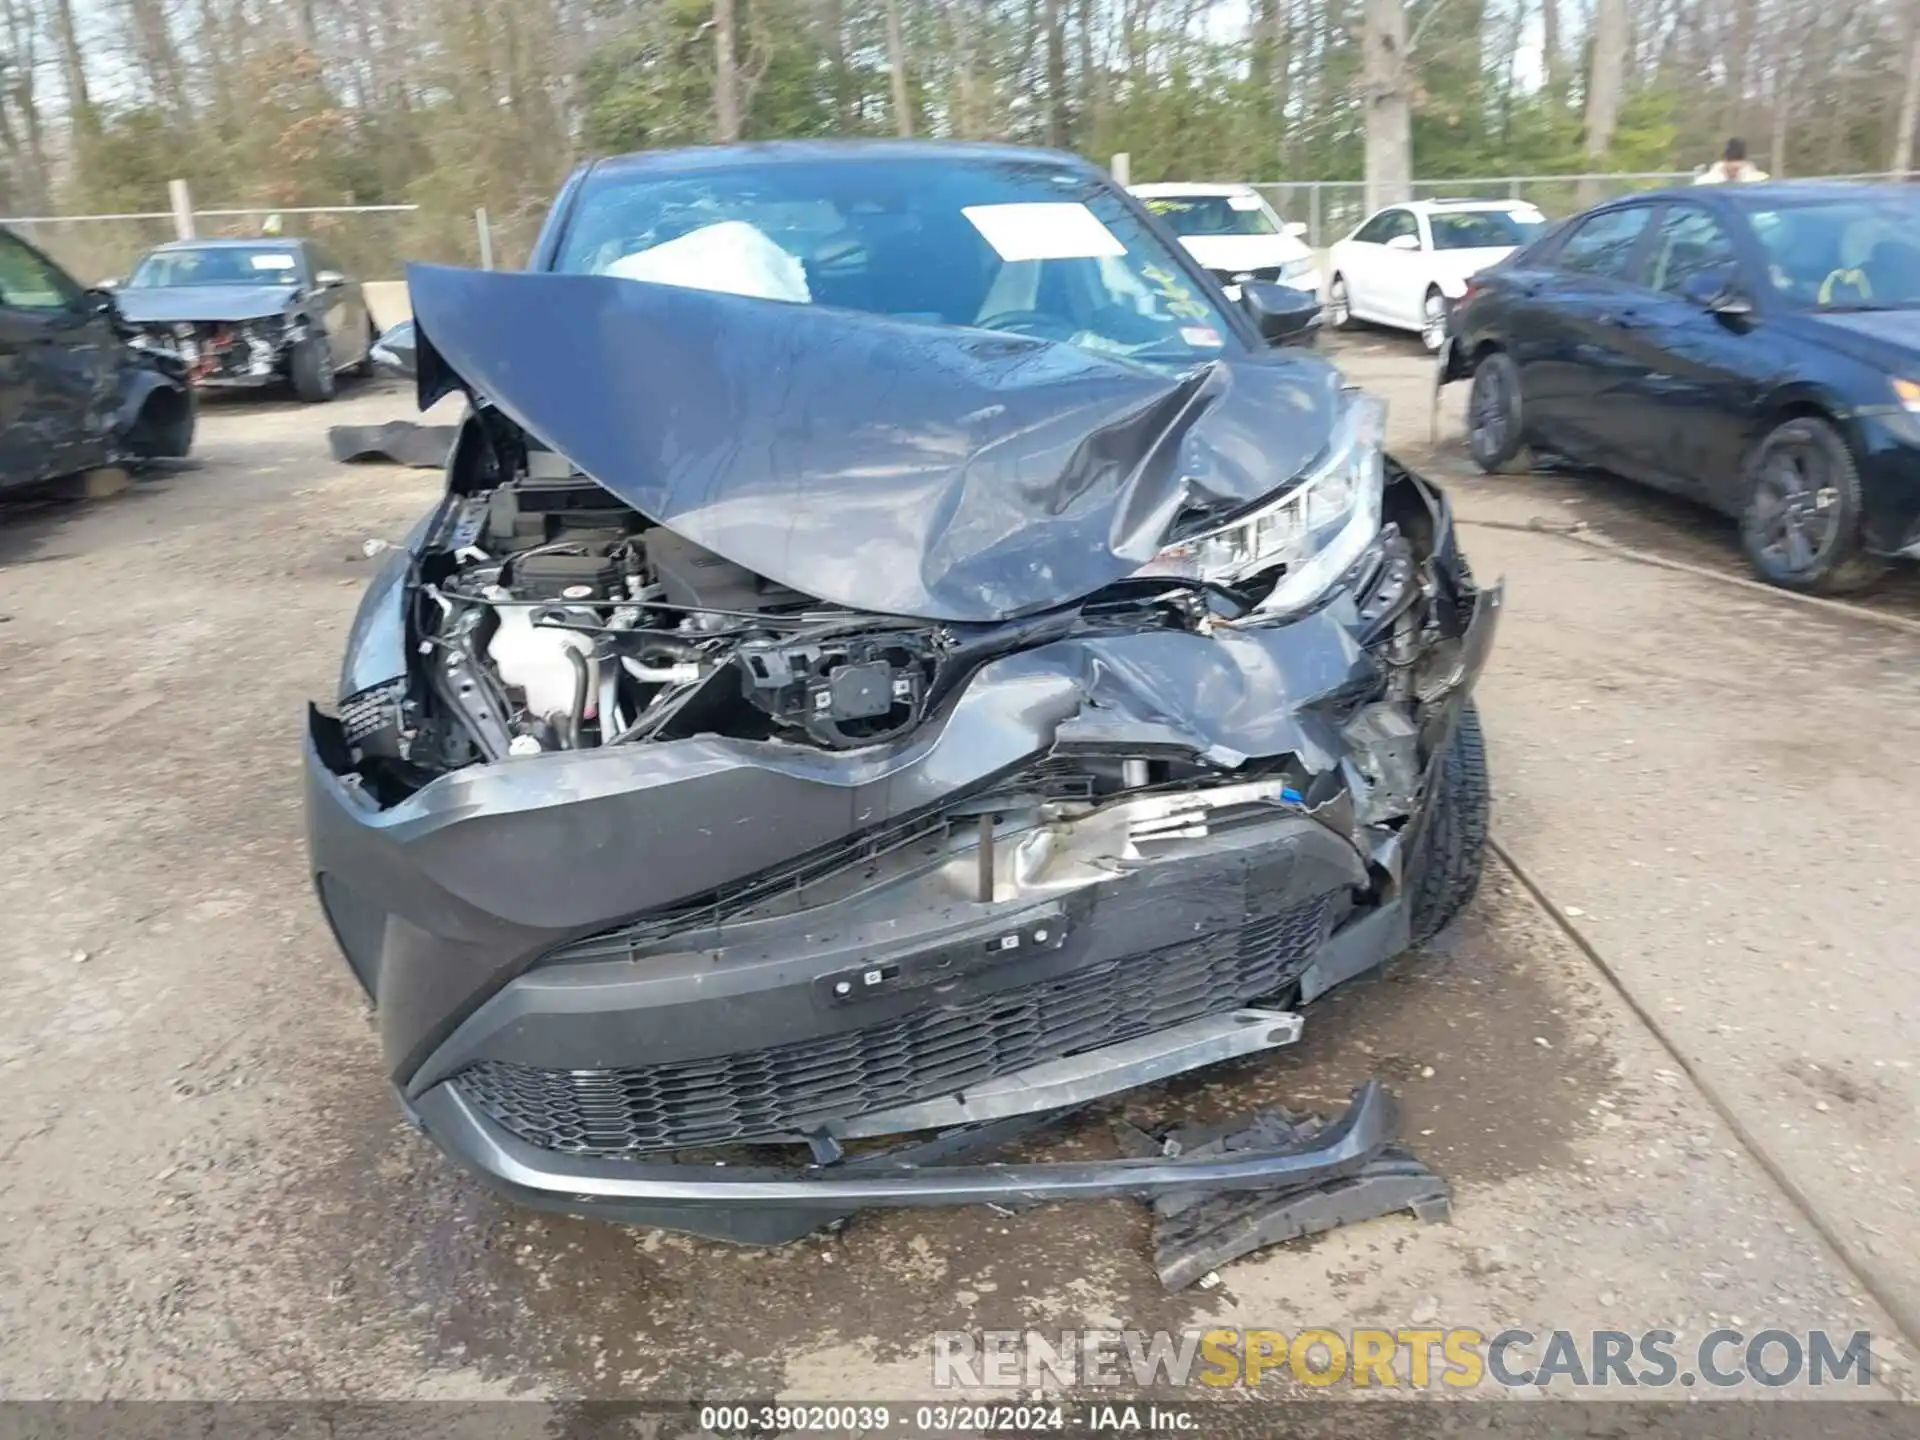 13 Photograph of a damaged car NMTKHMBXXNR145634 TOYOTA C-HR 2022